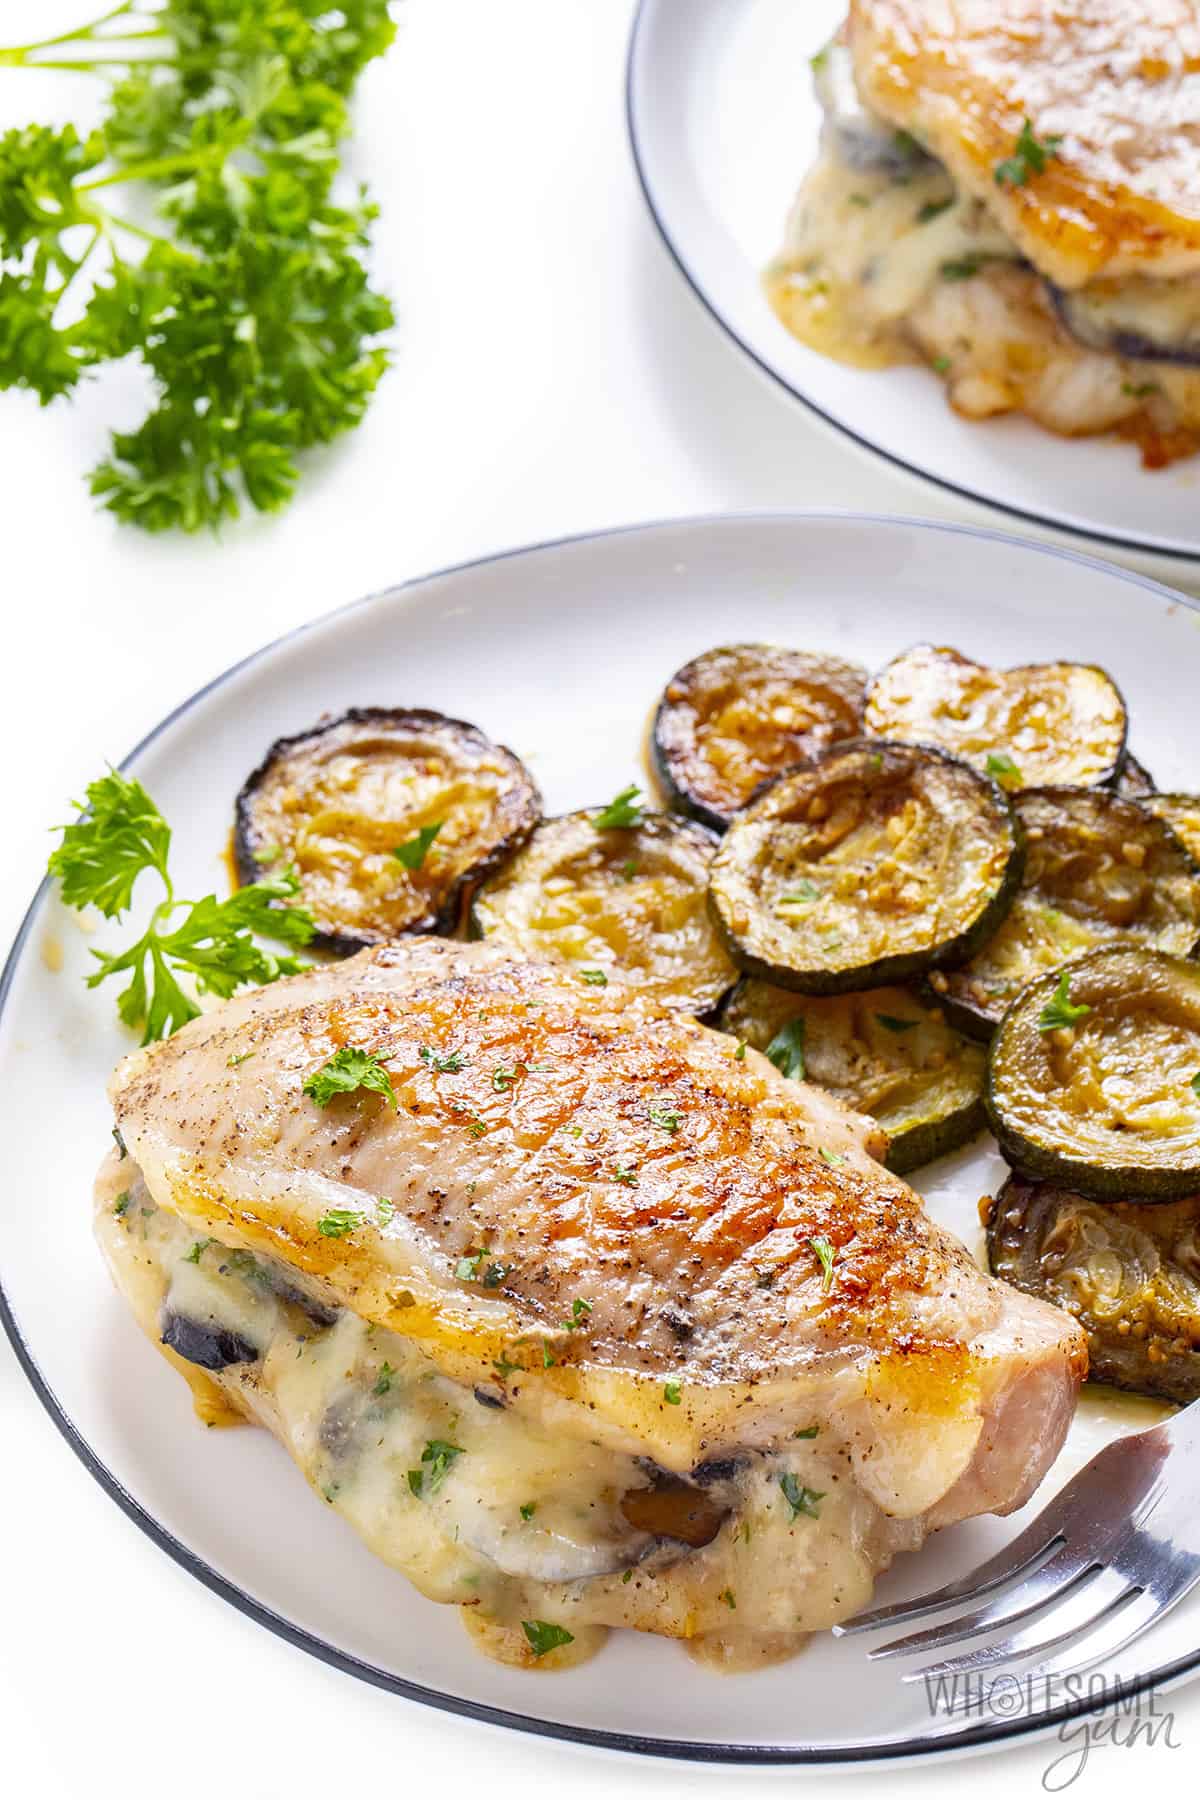 Plated stuffed pork chops with a side of sauteed zucchini.